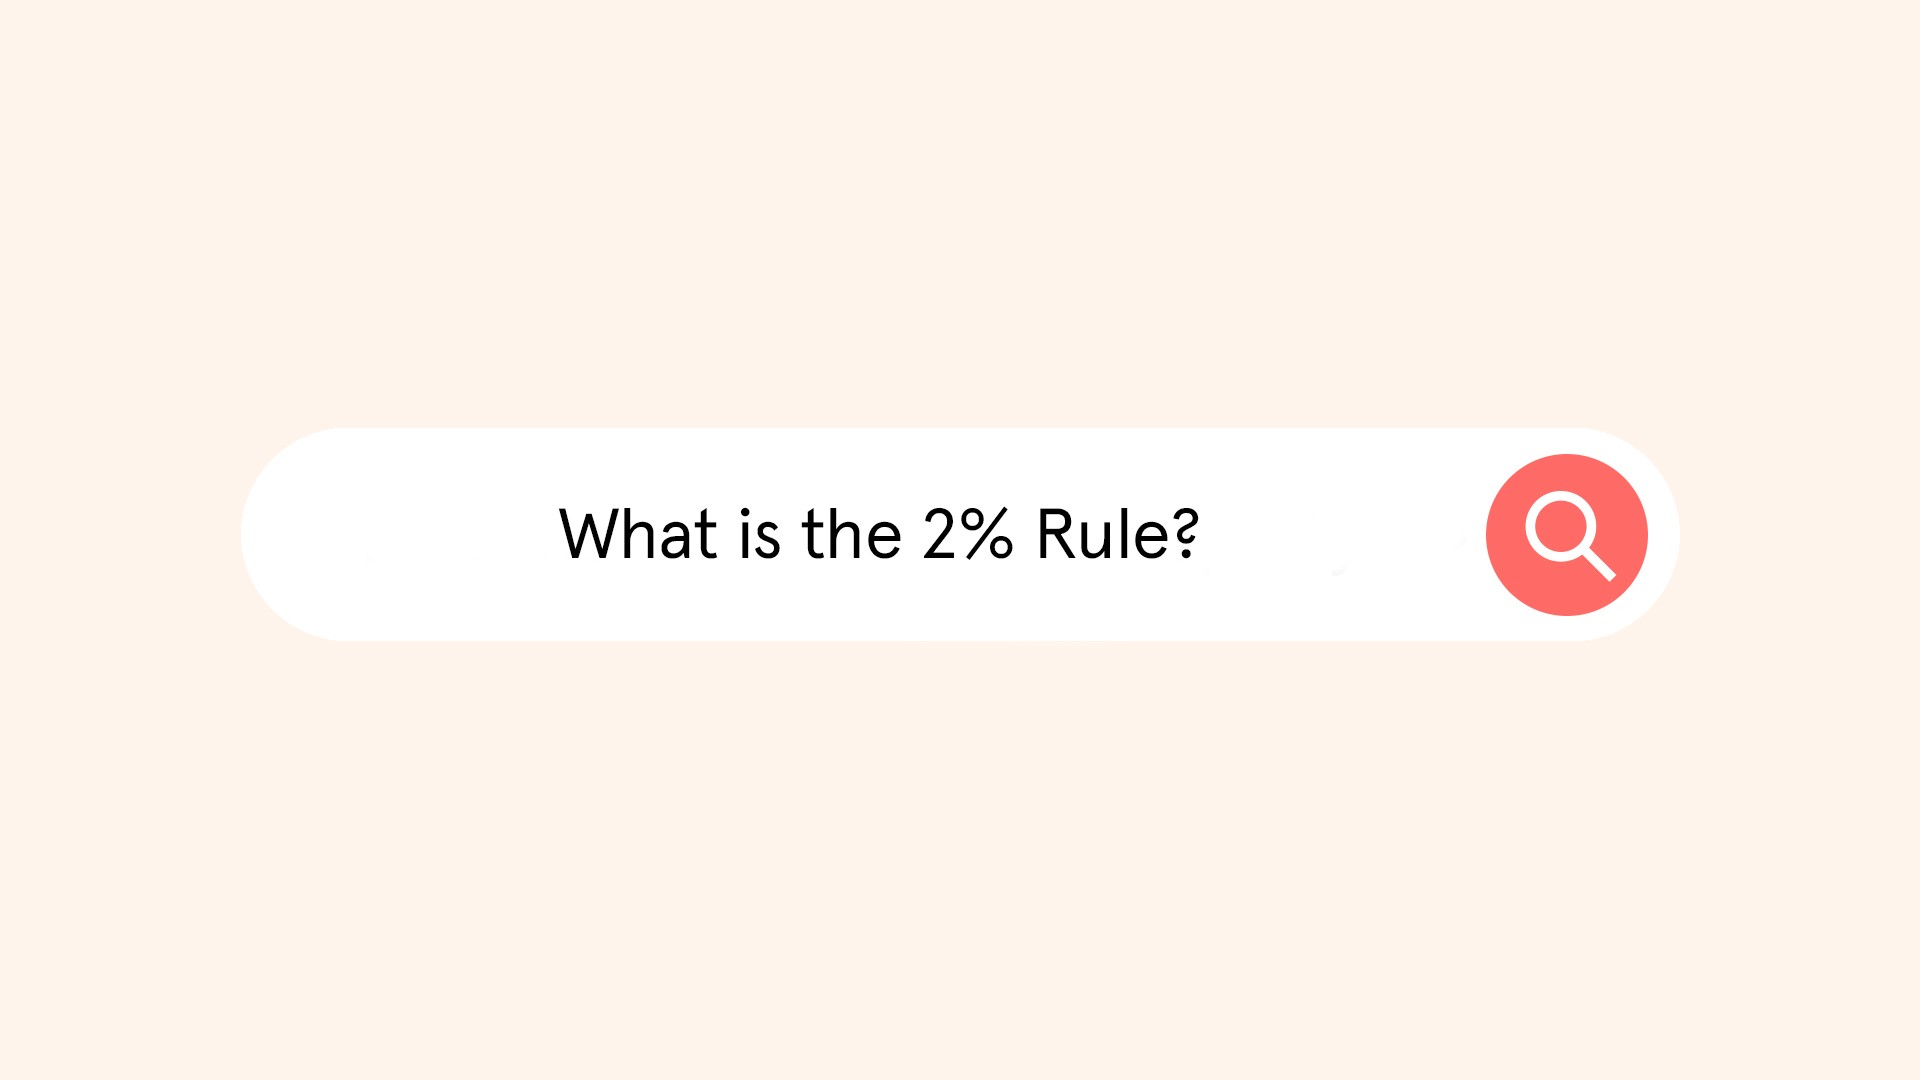 What is the 2% Rule in Real Estate?